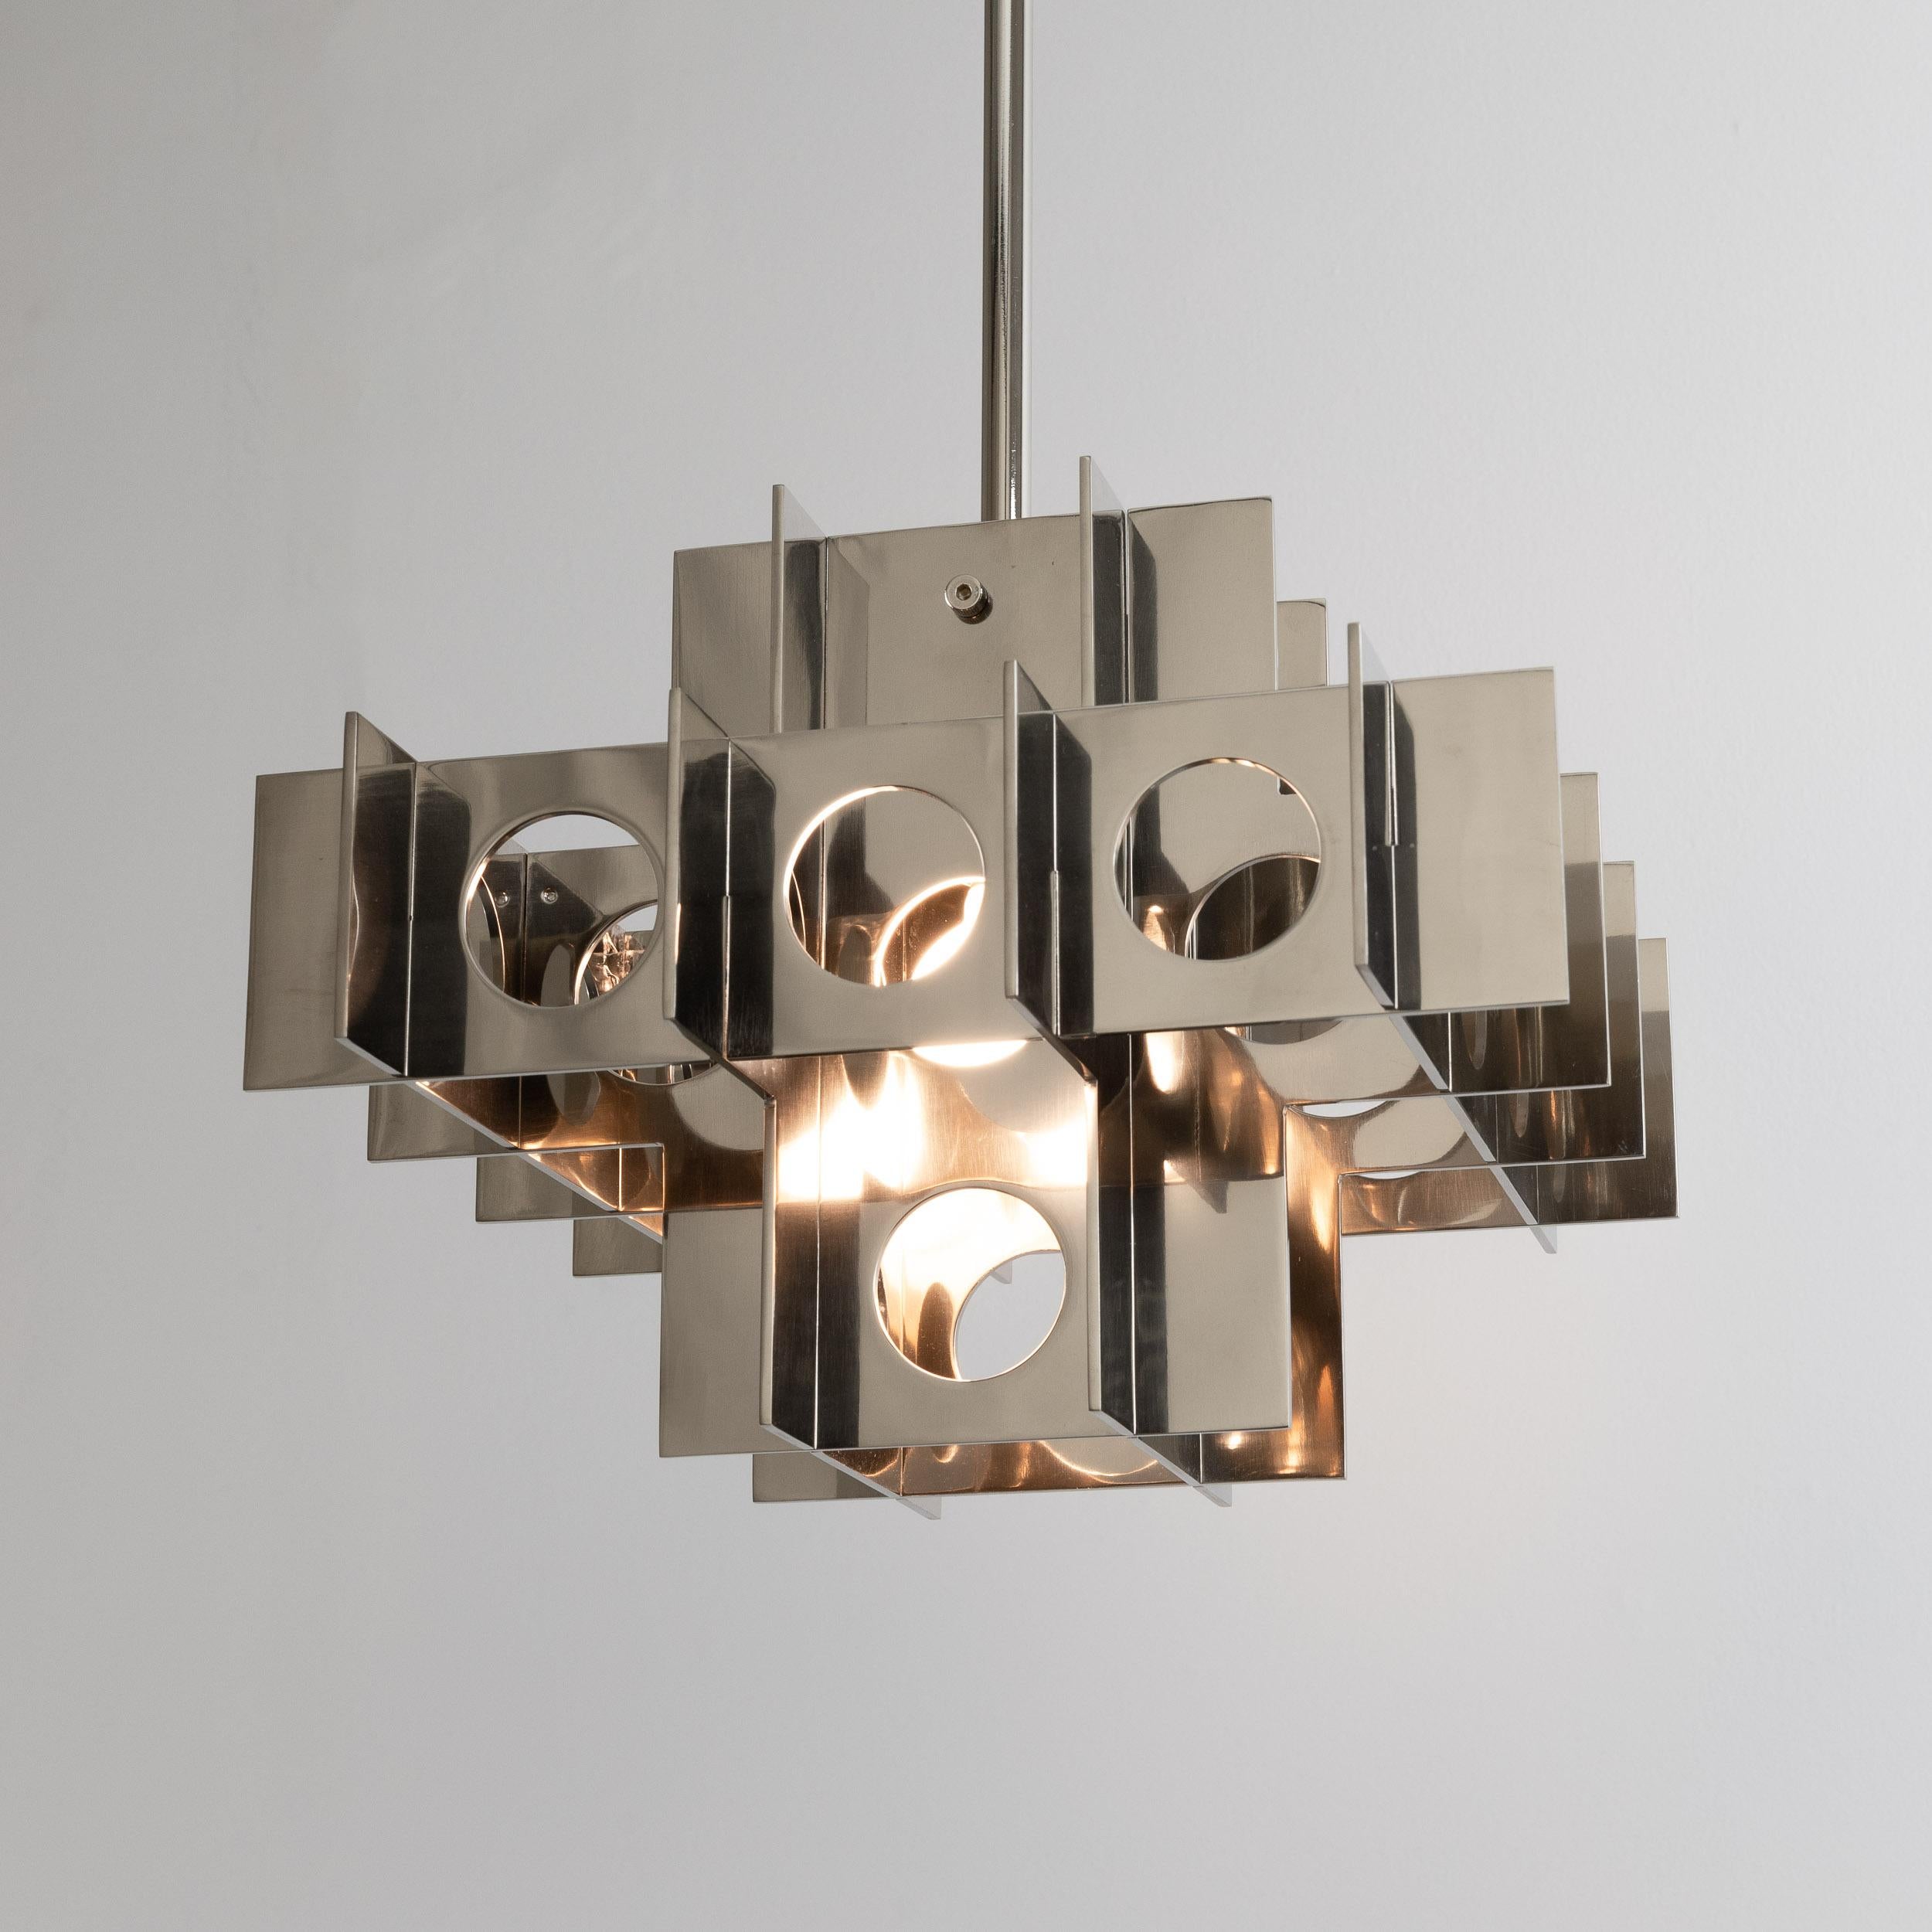 Tenfold Pendant 3TB in Polished Nickel by Luft Tanaka Studio

Composed of interlocking mirror polished metal panels, the Tenfold Series is inspired by the aesthetics, architectural styles, and art movements of the 1970s. The light fixture works well